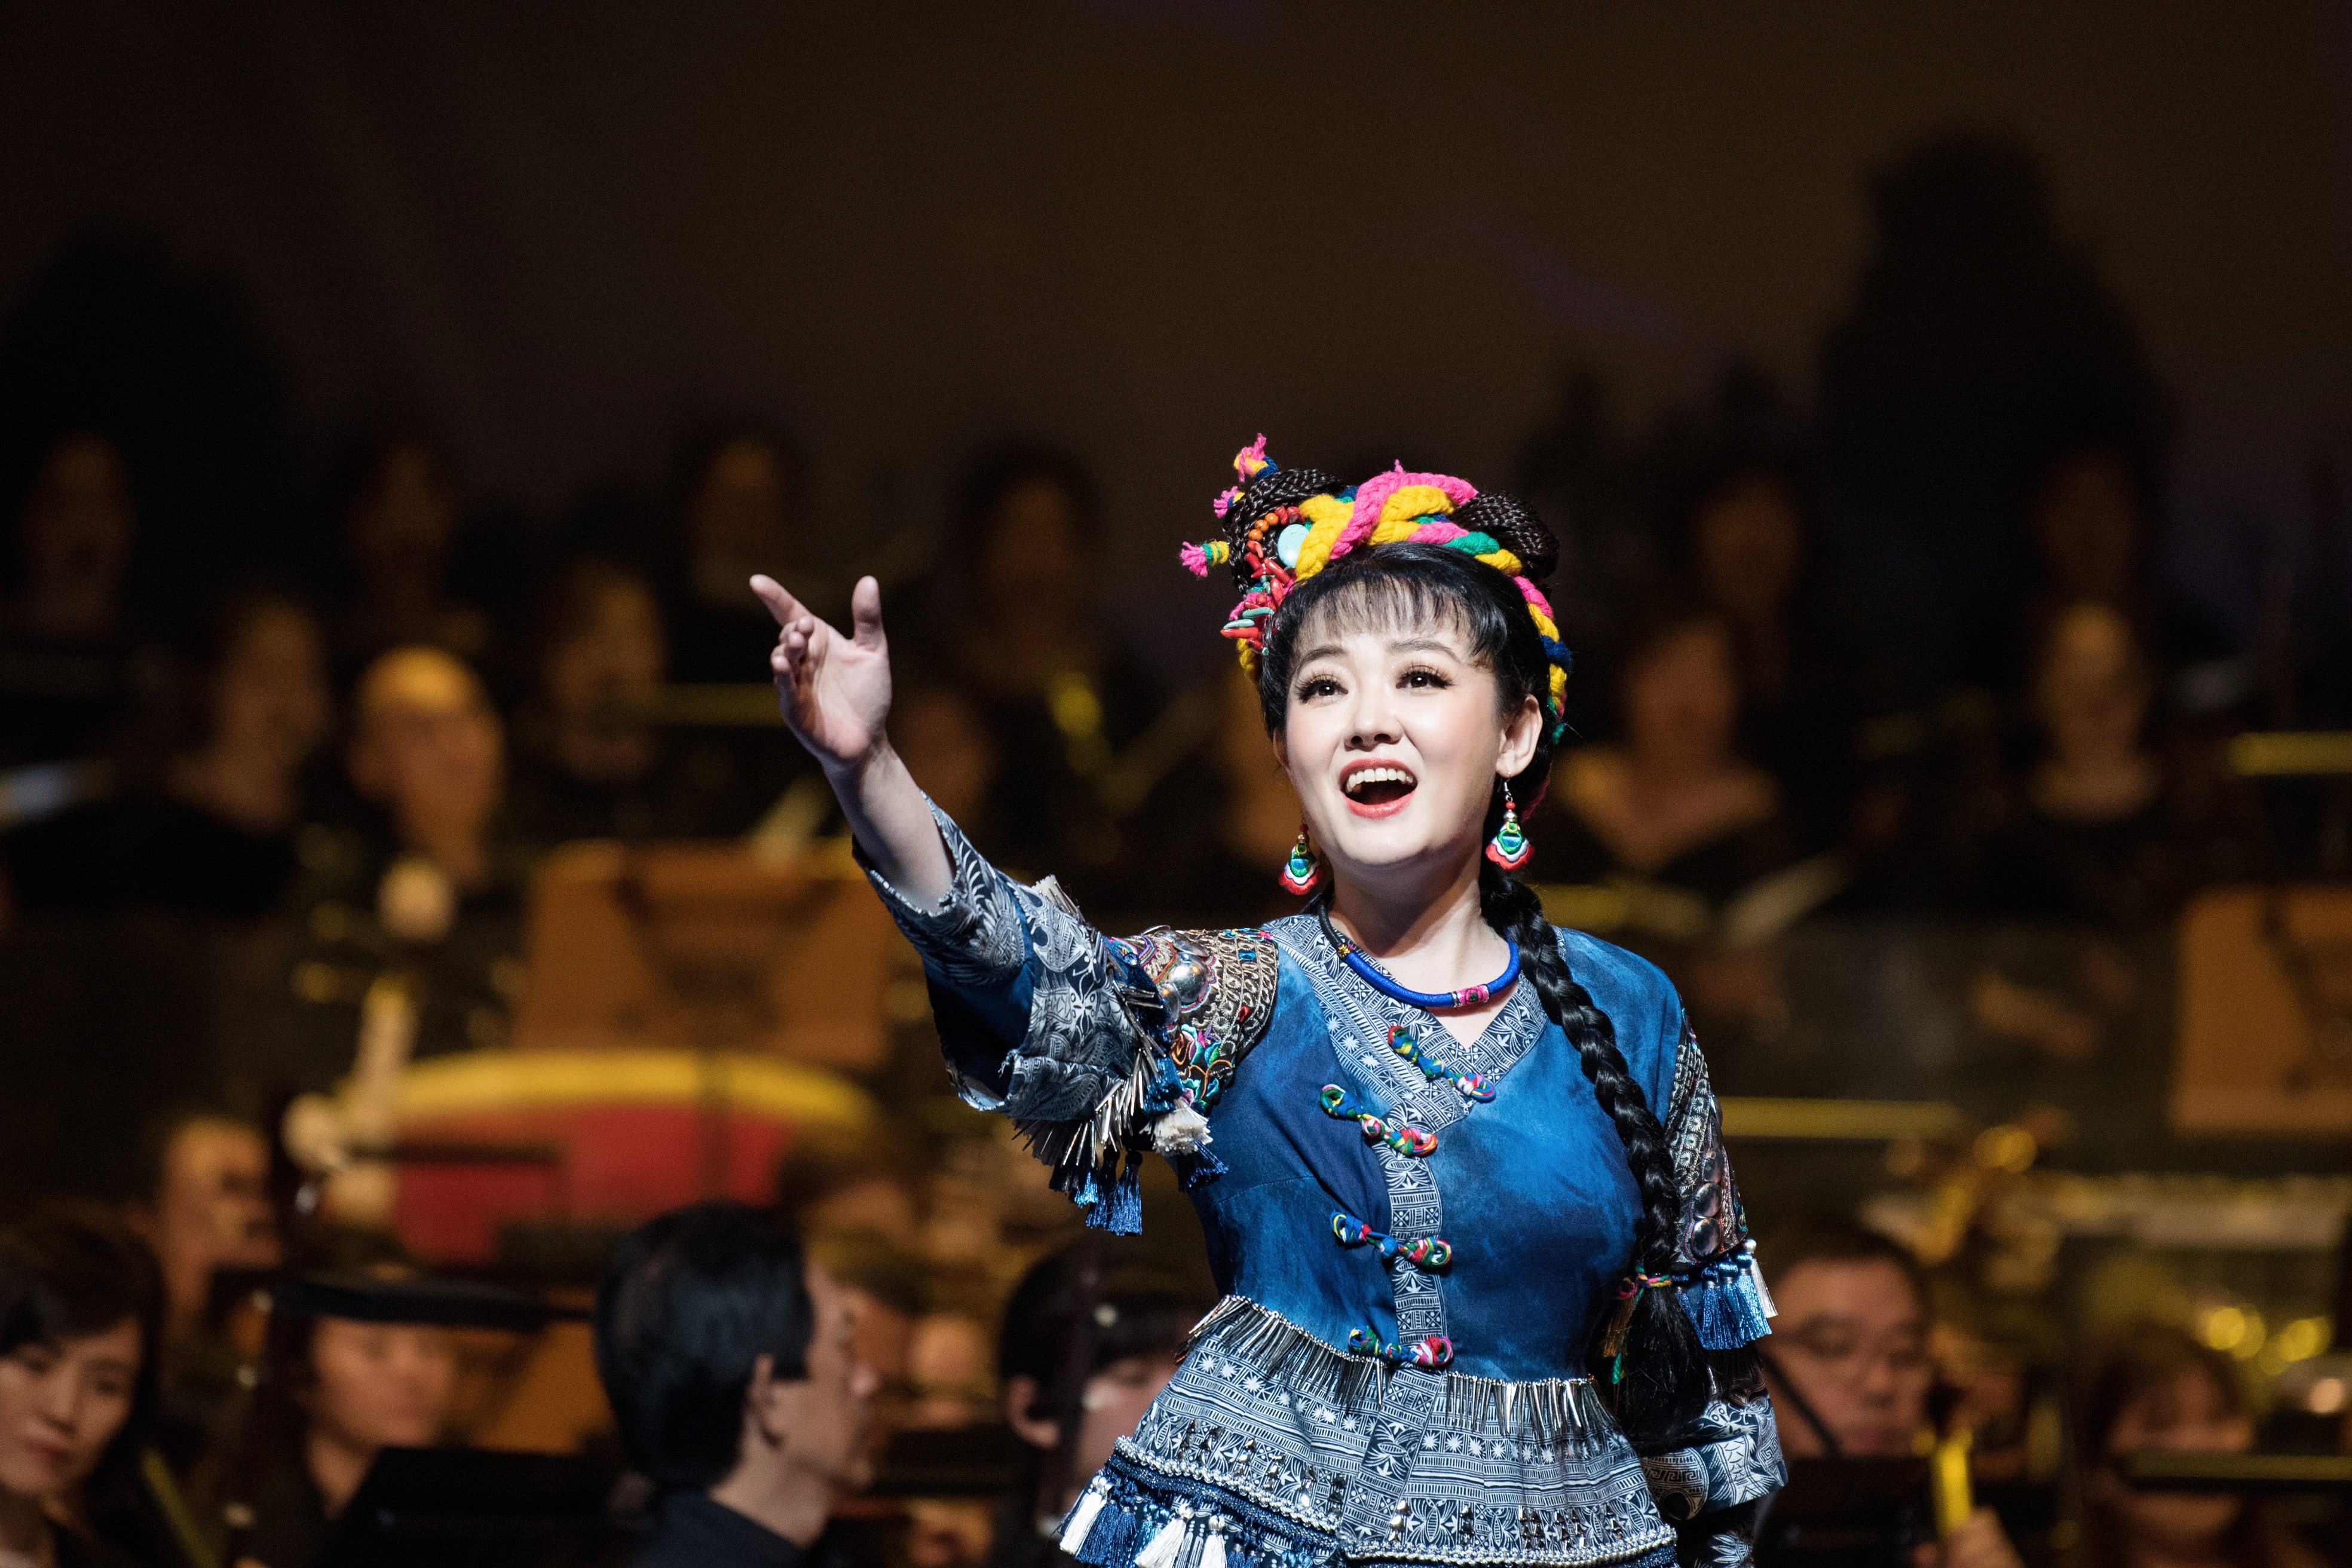  [CANCELLED] Songs of Liu Sanjie - A Musical Film in Concert